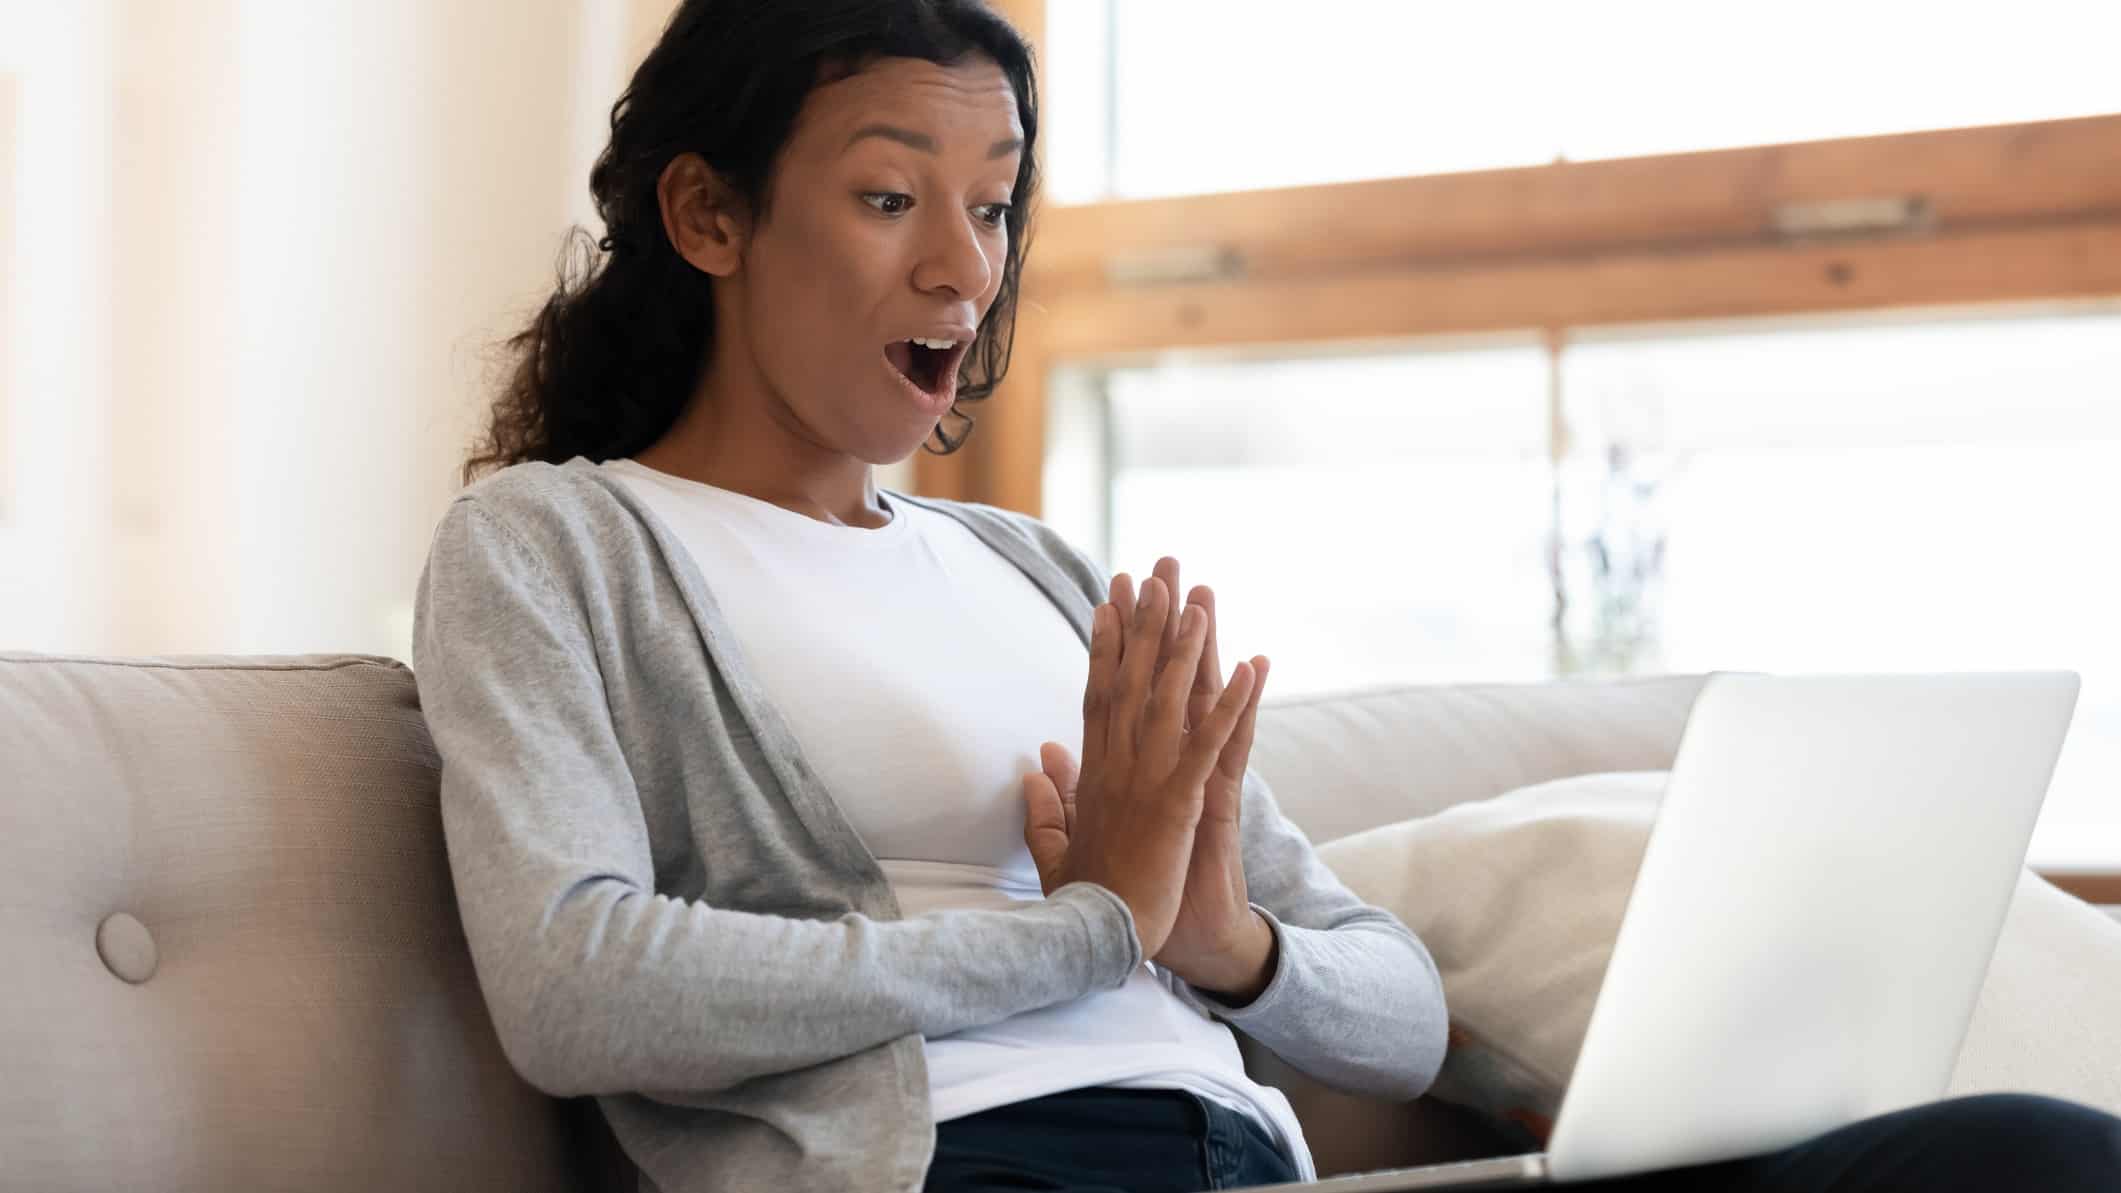 Young woman sitting on nice furniture is pleasantly surprised at what she's seeing on her laptop screen.